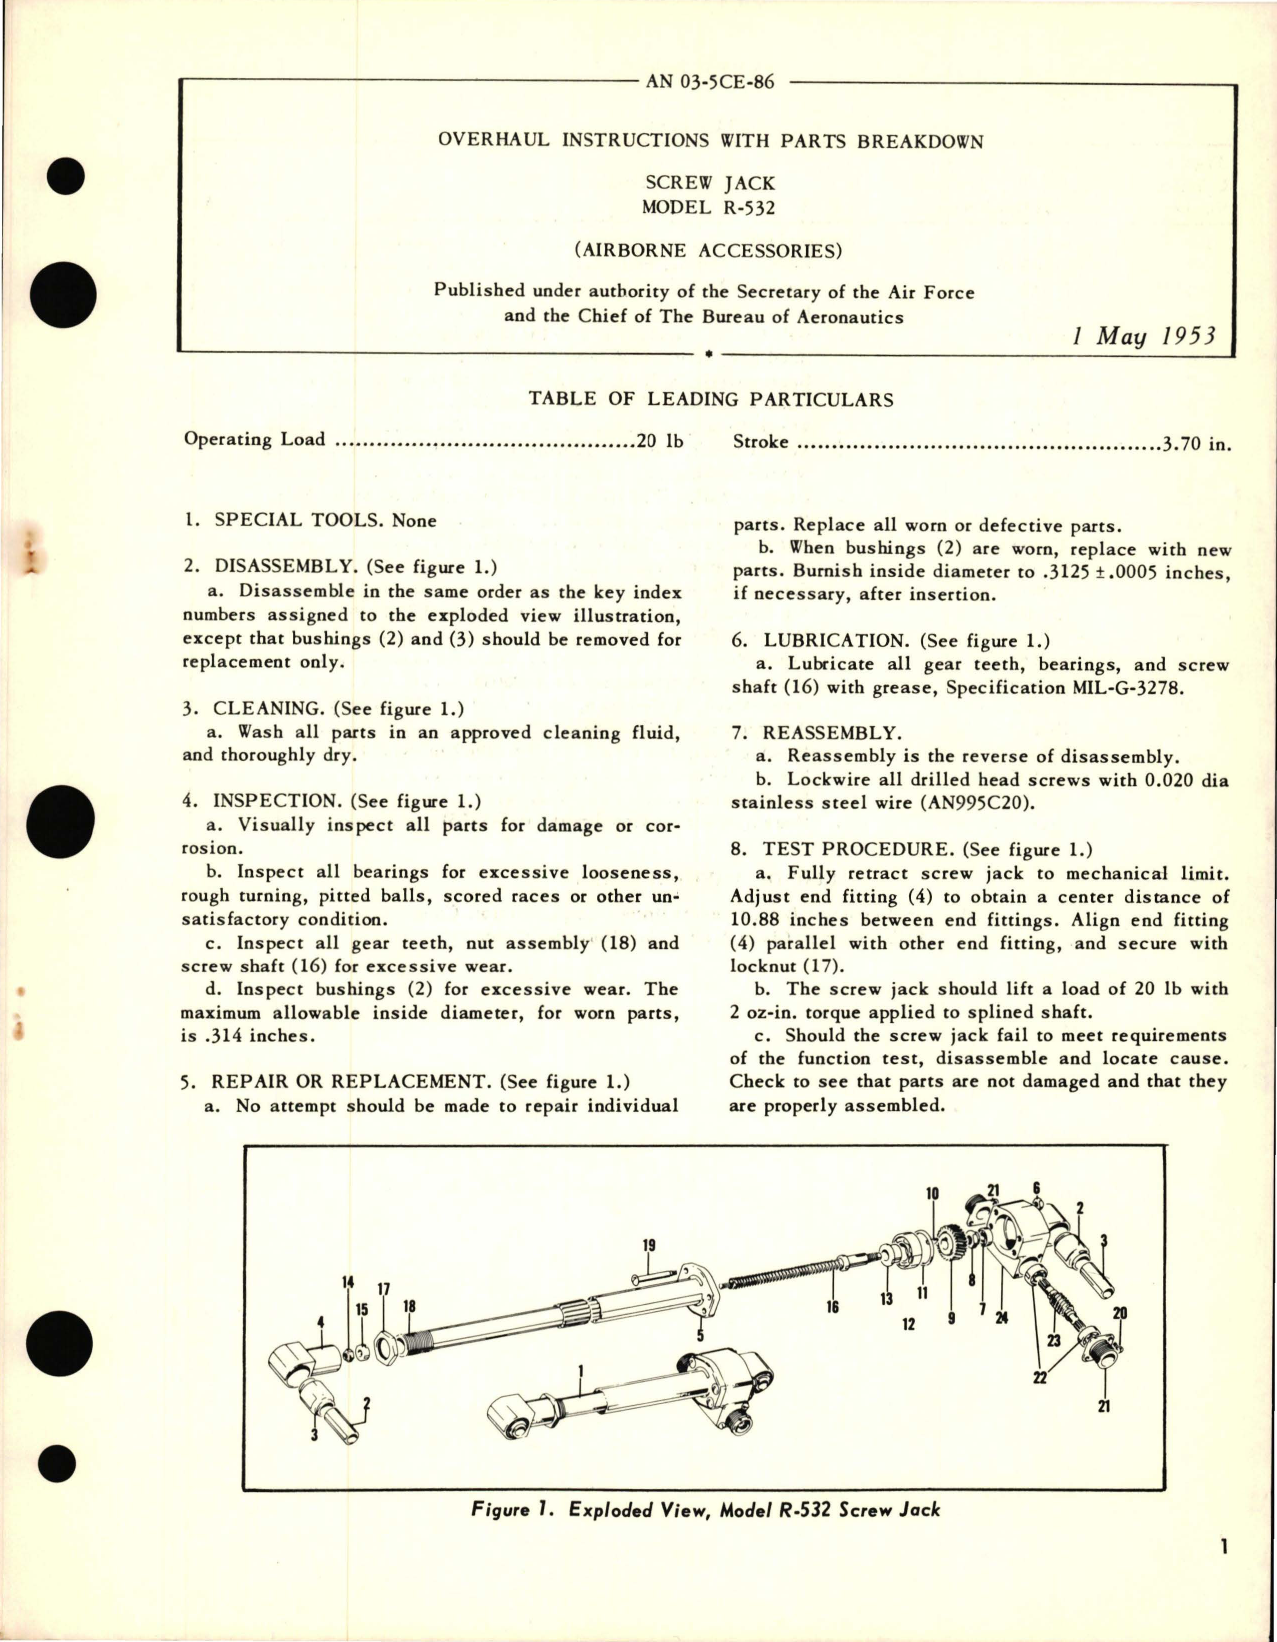 Sample page 1 from AirCorps Library document: Overhaul Instructions w Parts Breakdown for Screw Jack - Model R-532 